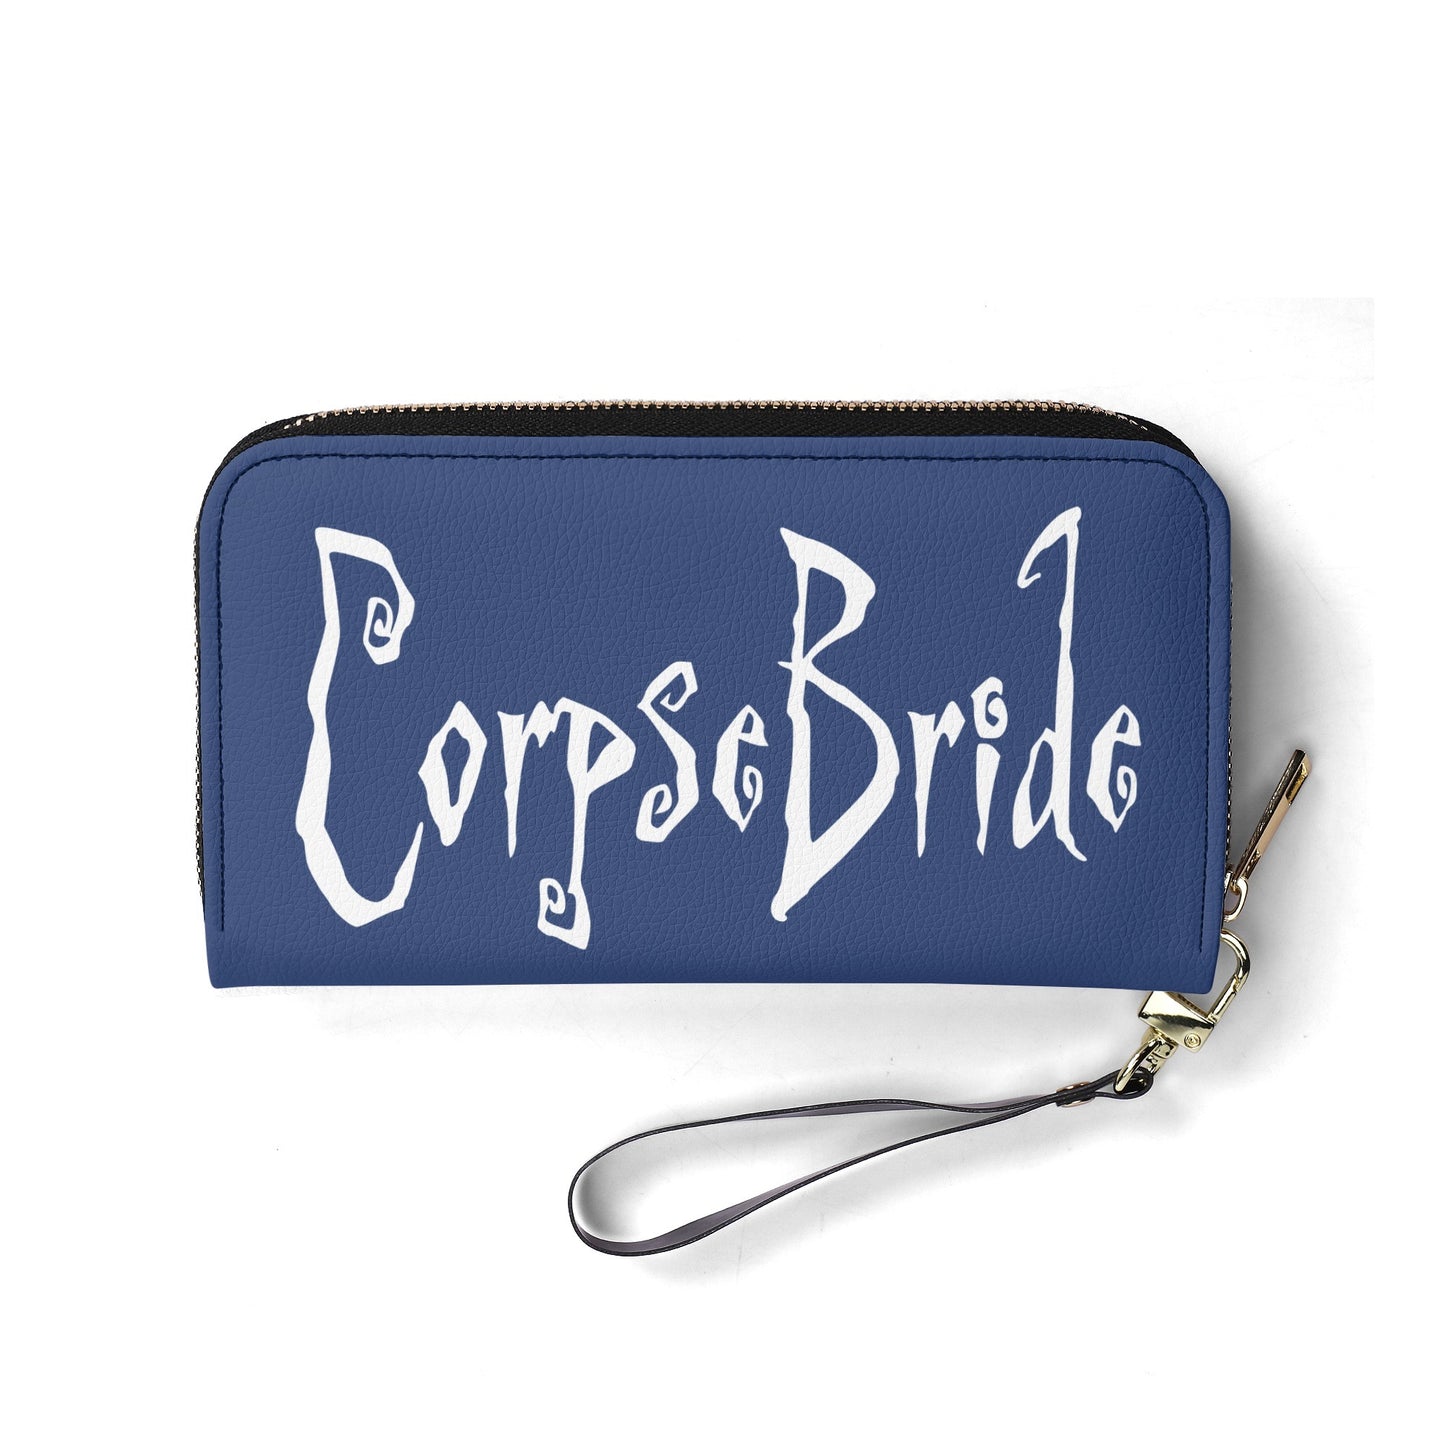 Corpse Bride Leather Bag